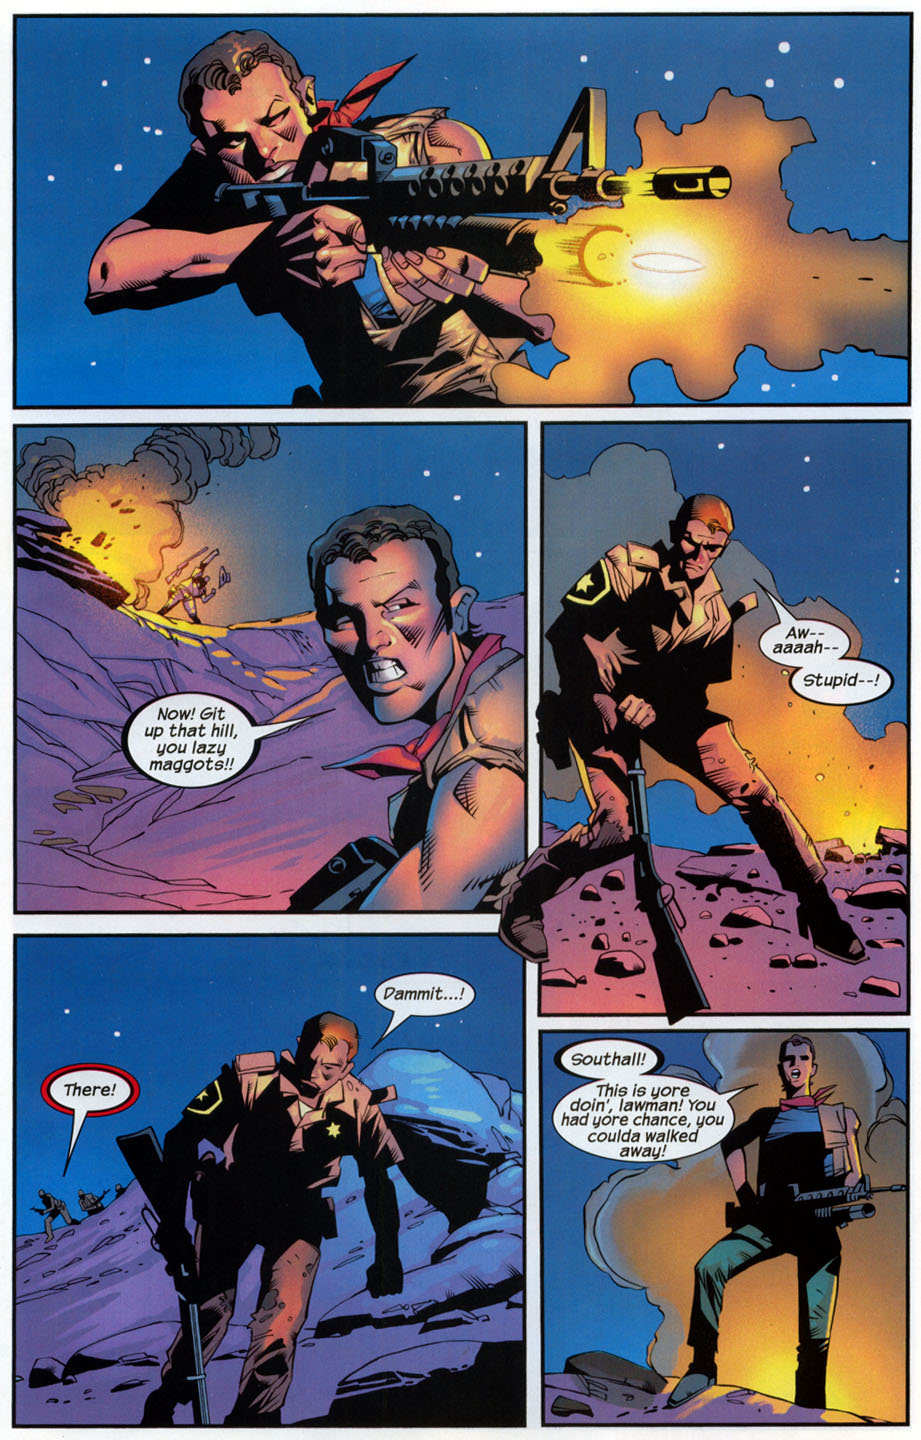 The Punisher (2001) issue 30 - Streets of Laredo #03 - Page 20